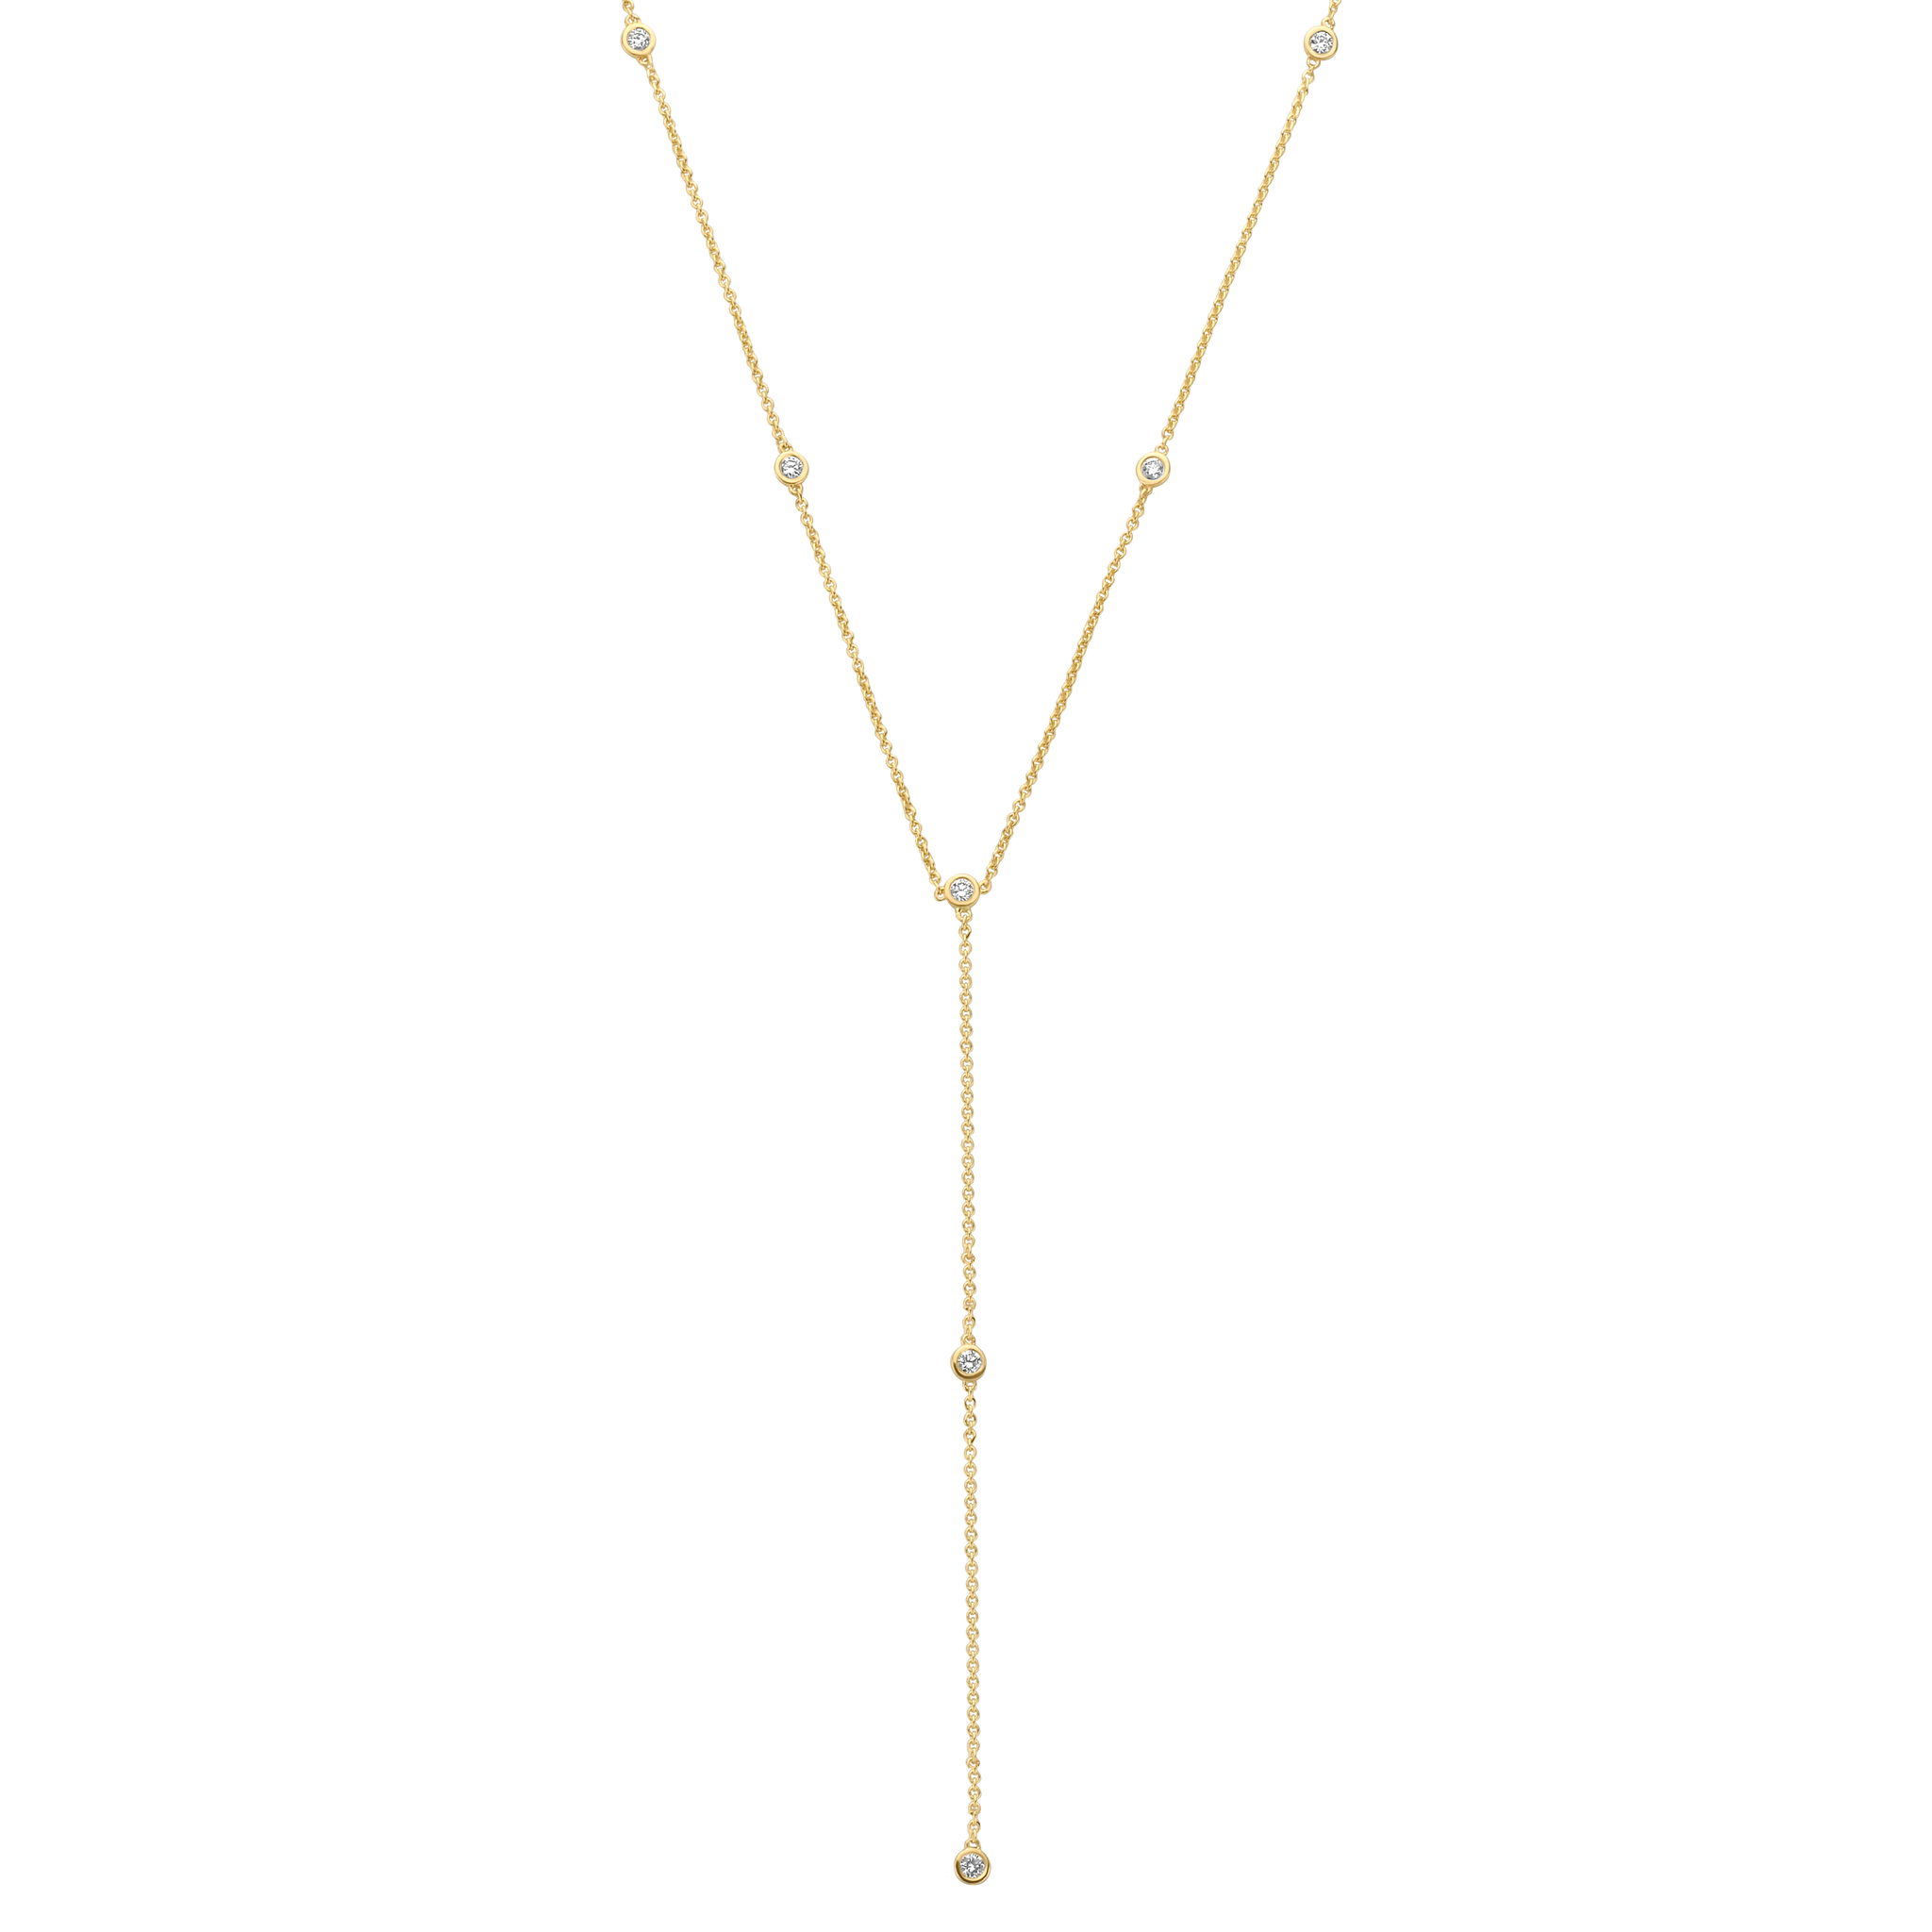 9 bezel-set round brilliants wrap around a drop chain lariat of recycled 18K gold. The collar of the necklace measures 16 inches (40cm); the length of the drop is 4 inches (10cm). To customize, please write to our Atelier.